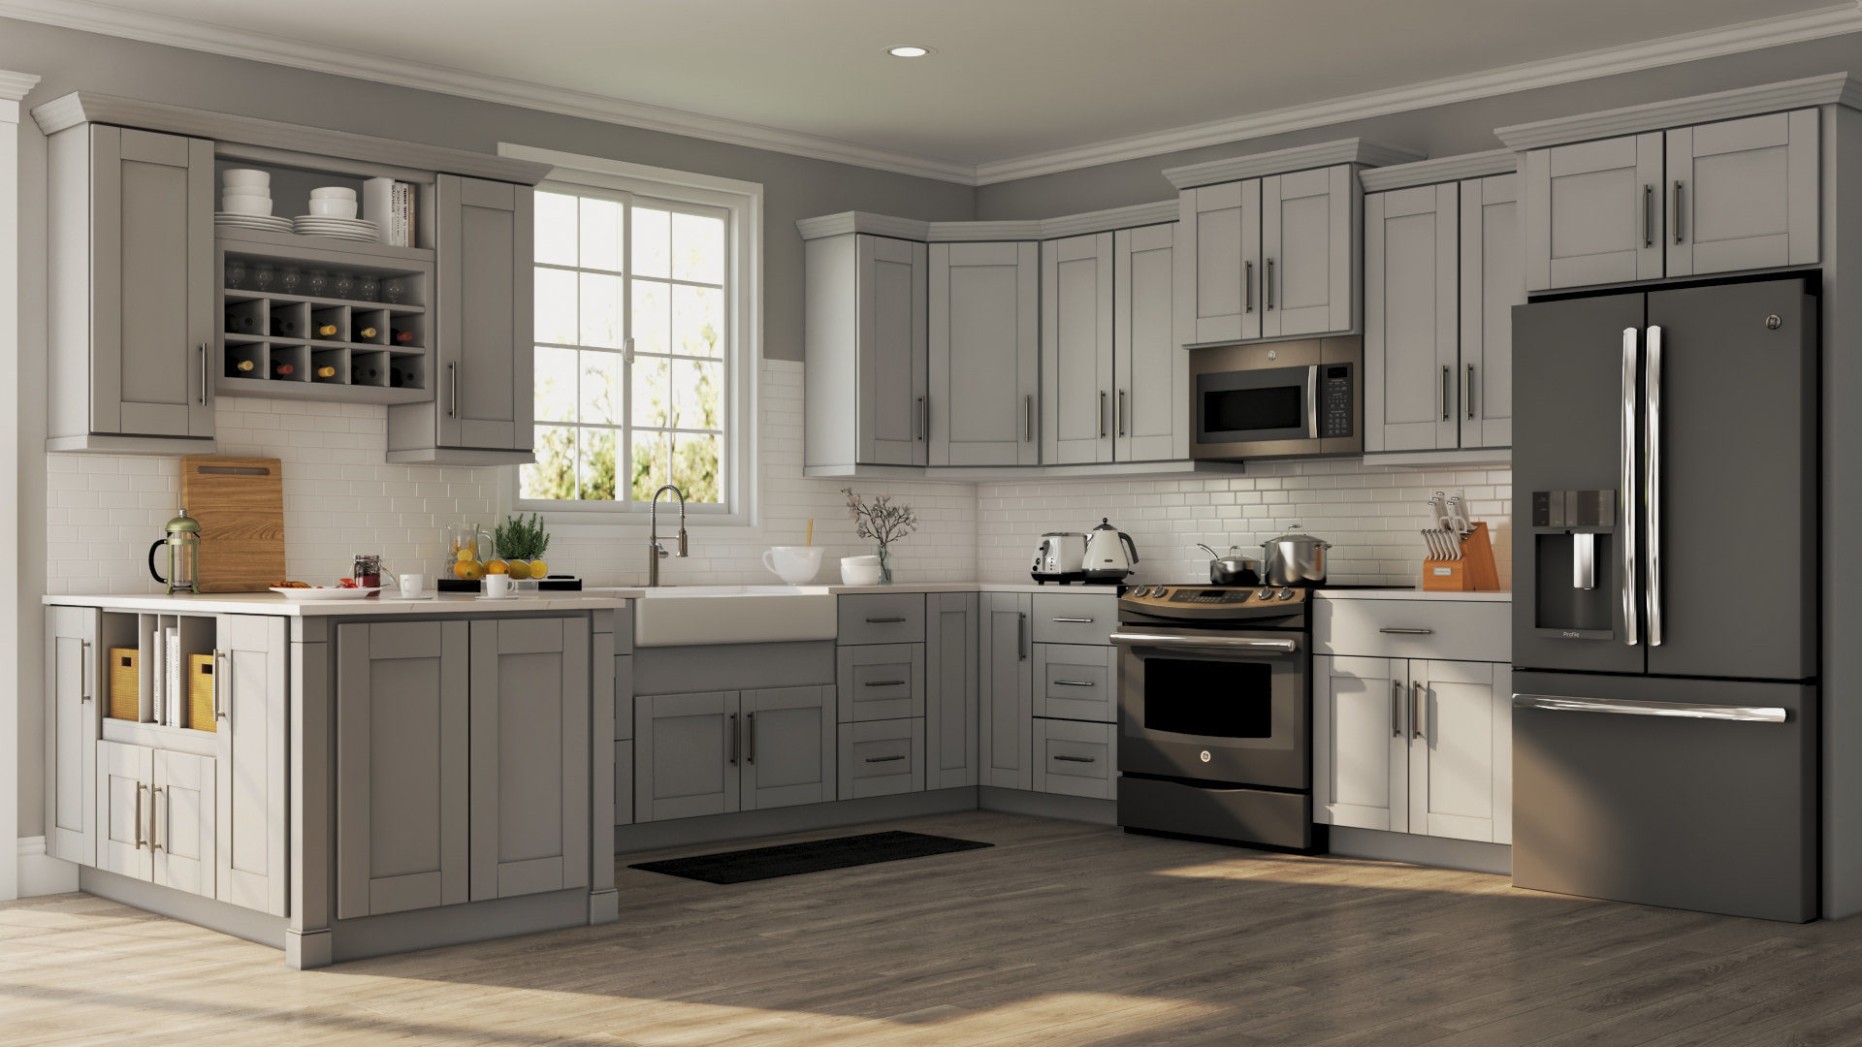 Shaker Wall Cabinets in Dove Gray – Kitchen – The Home Depot